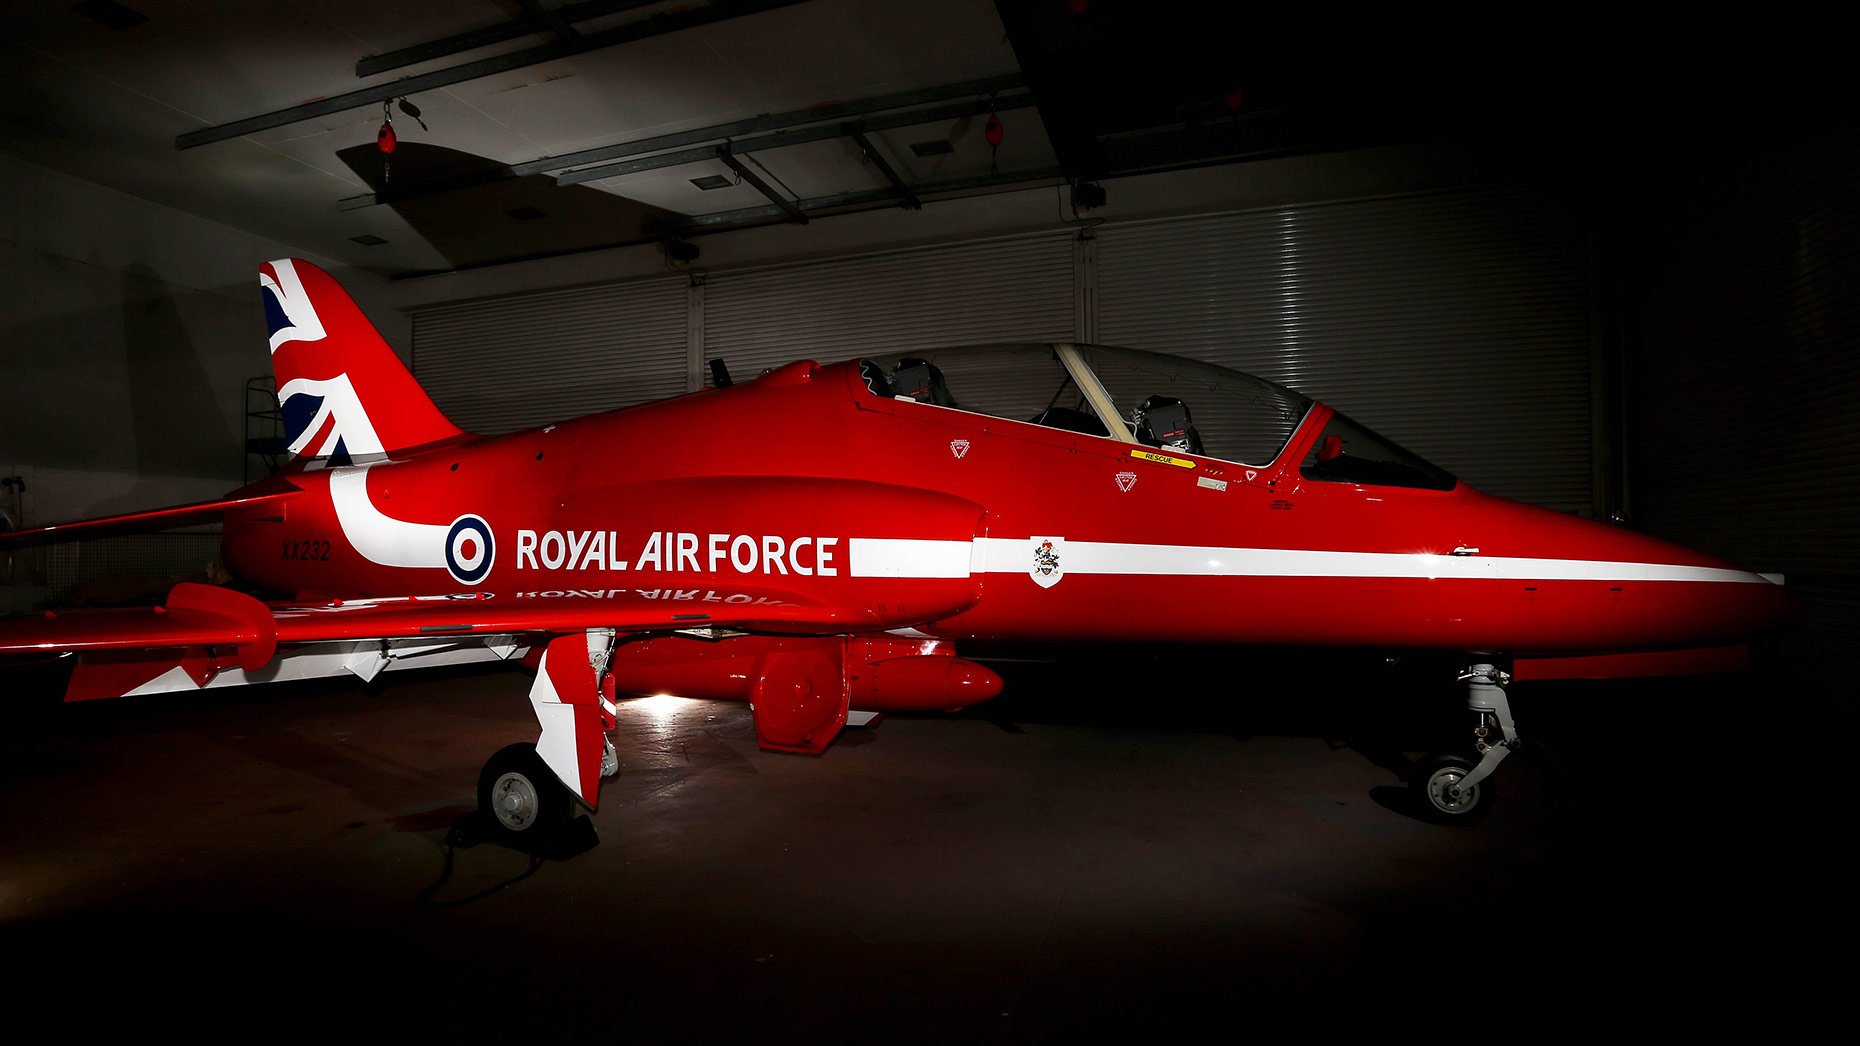 A look at the new design for the Red Arrows. Photo SAC Craig Marshall, MoD/Crown Copyright 2015